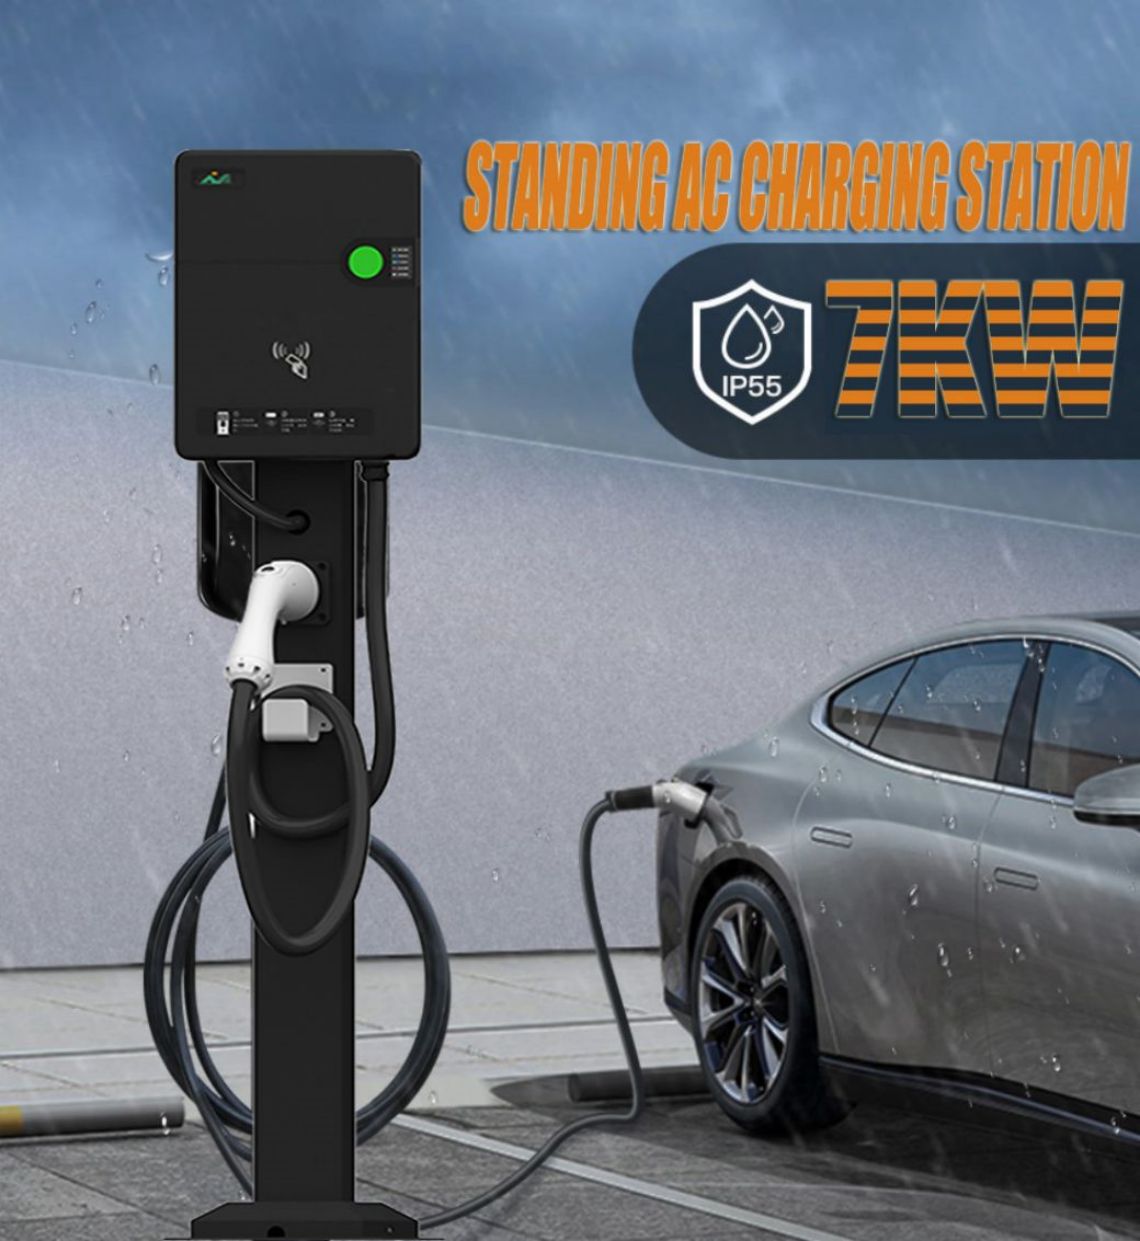 Floor mounted EV Power Station electric car AC fast Charging Stationstanding